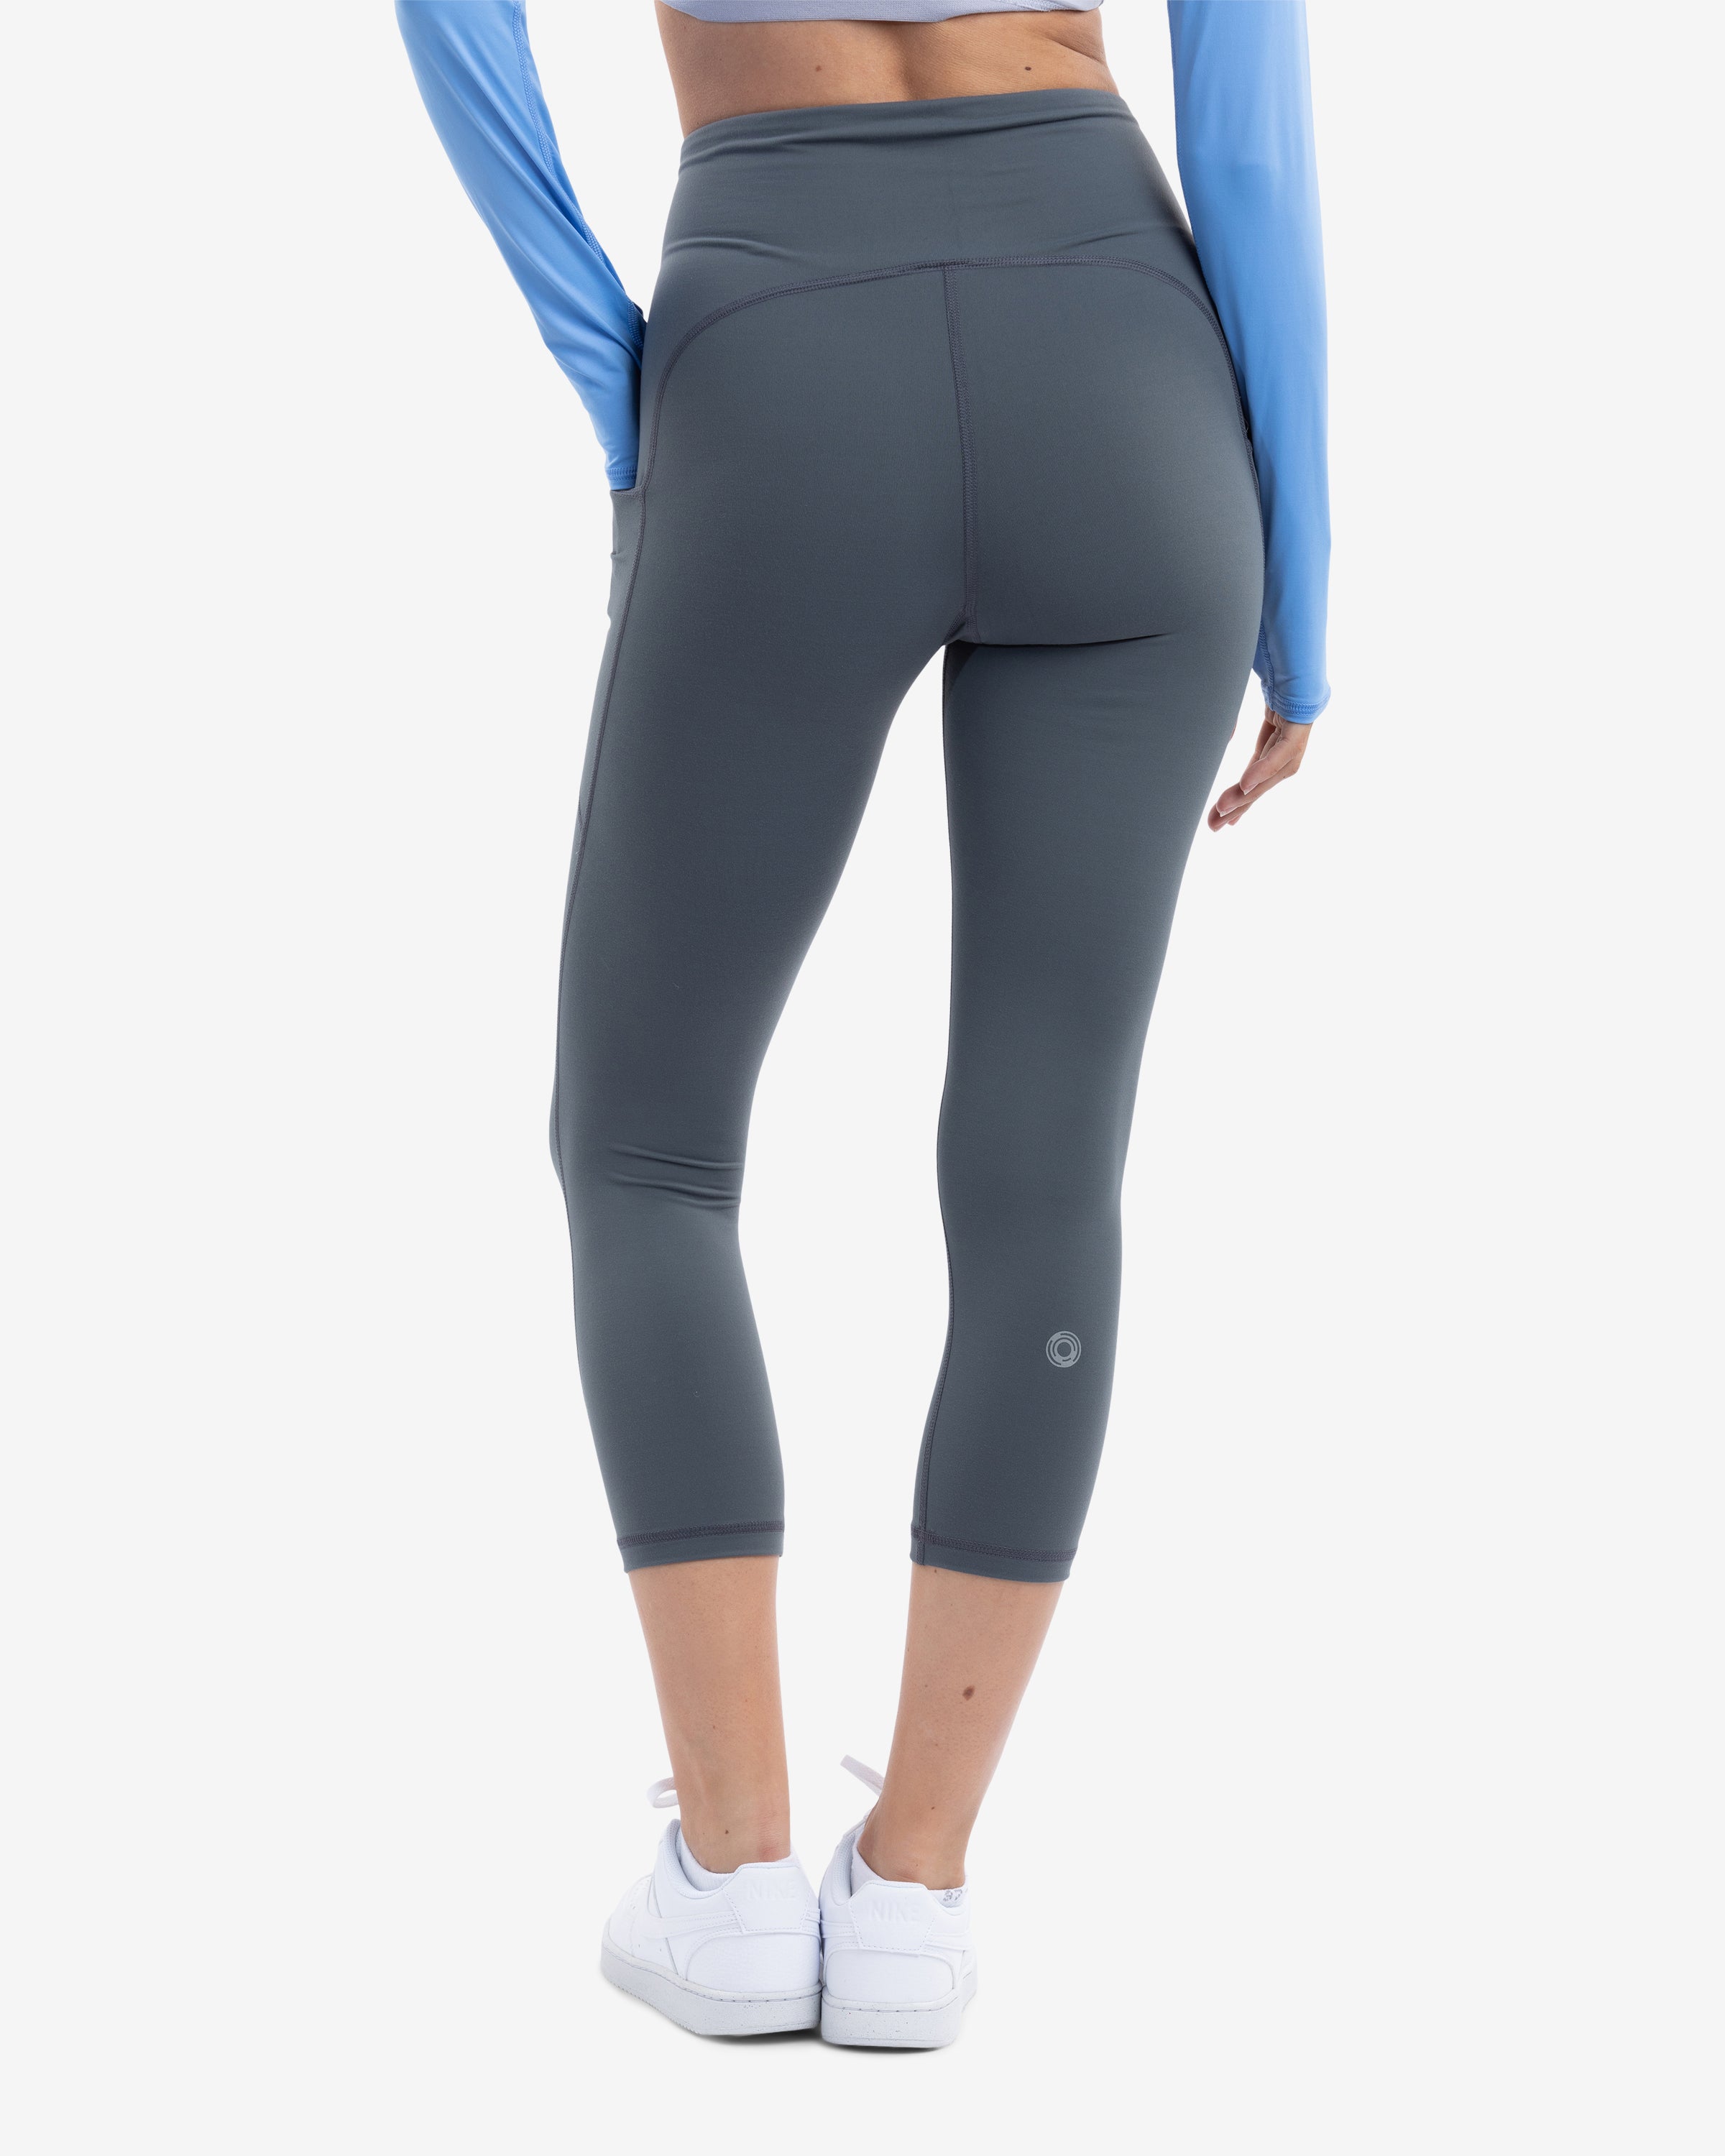 611, Compression Capris - Perfect pair to wear with everything